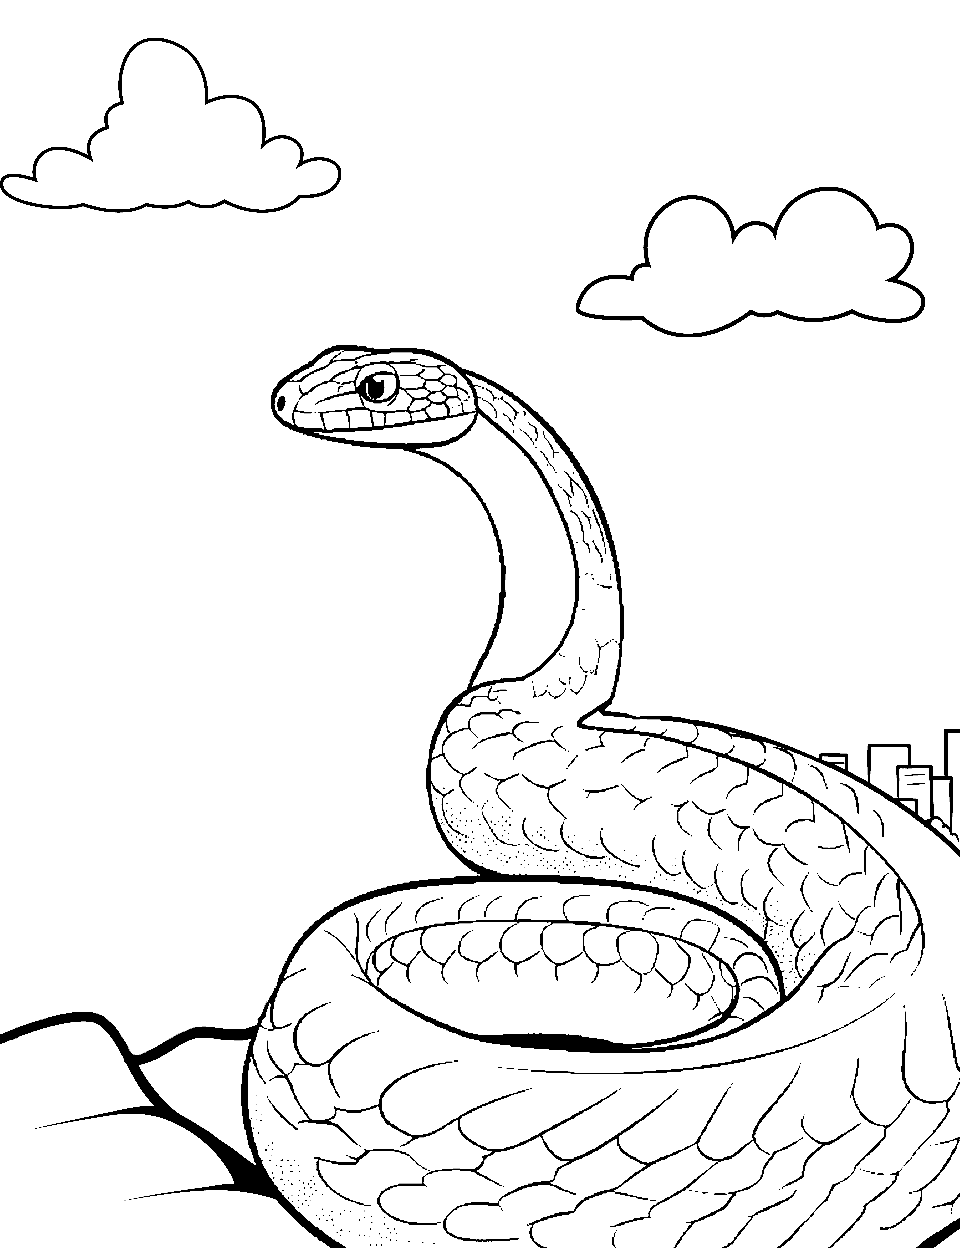 Snake on a Ledge Coloring Page - A snake perched on a ledge overlooking a view.